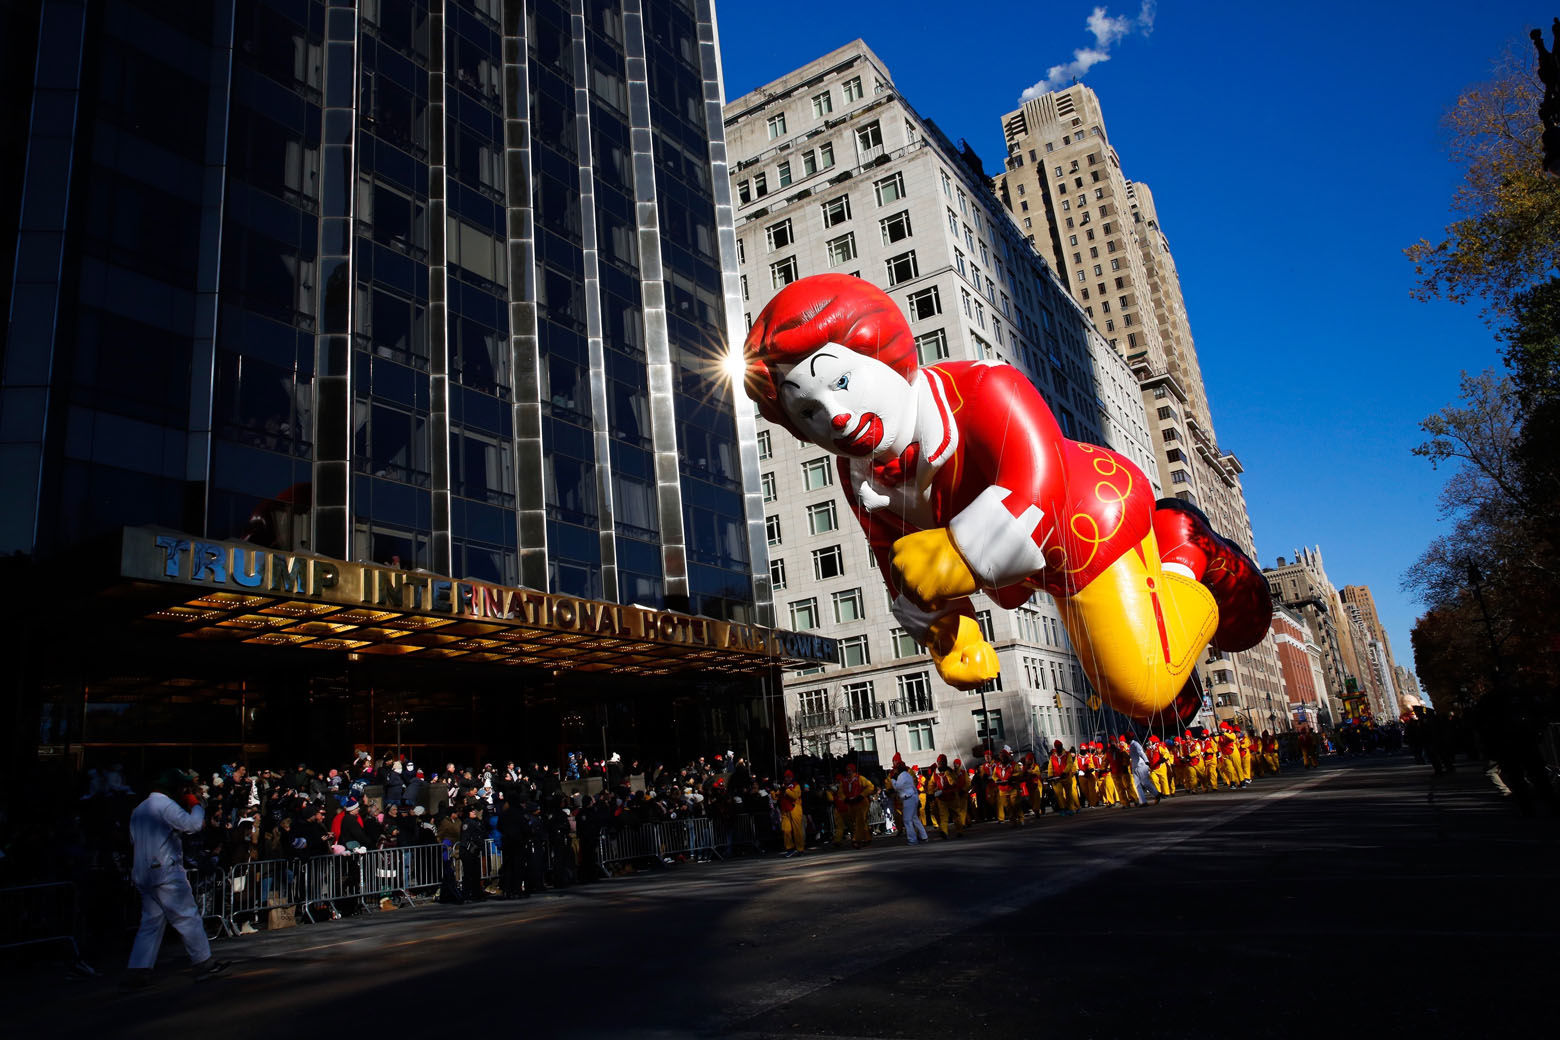 The Ronald McDonald balloon passes by windows of a building on Central Park West during the 92nd annual Macy's Thanksgiving Day Parade in New York, Thursday, Nov. 22, 2018. (AP Photo/Eduardo Munoz Alvarez)